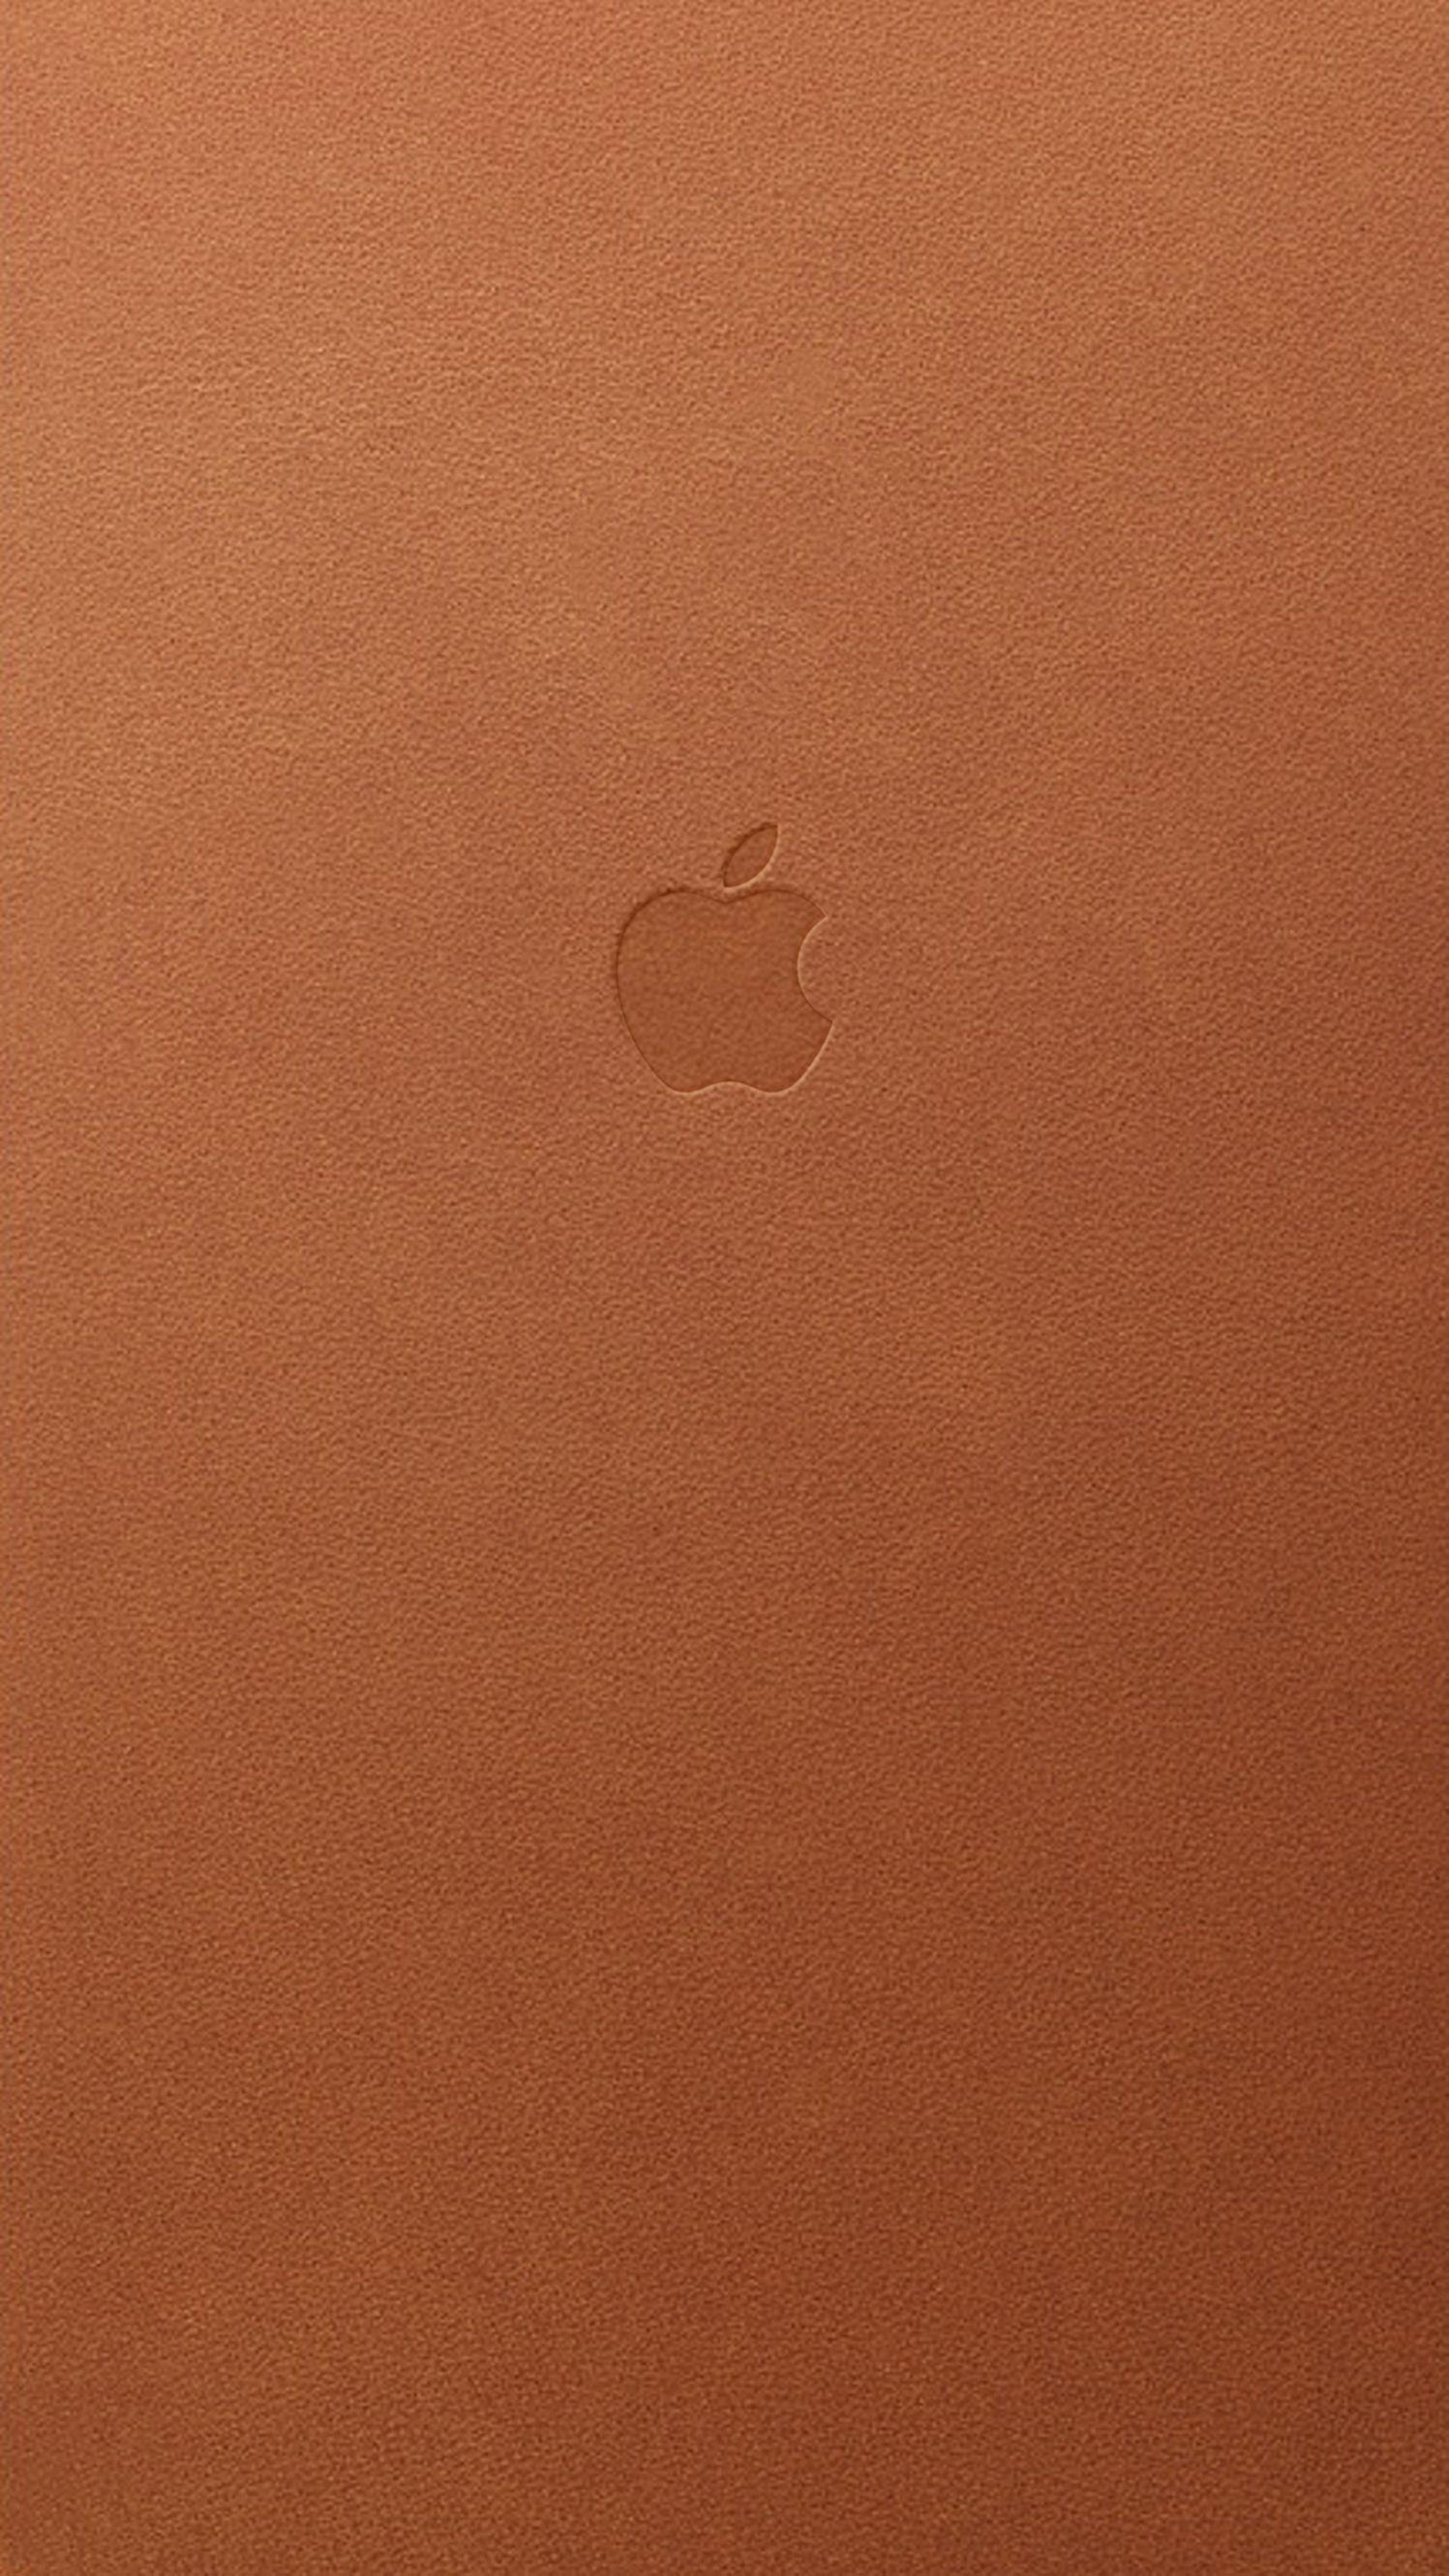 These wallpaper will match your Apple leather case